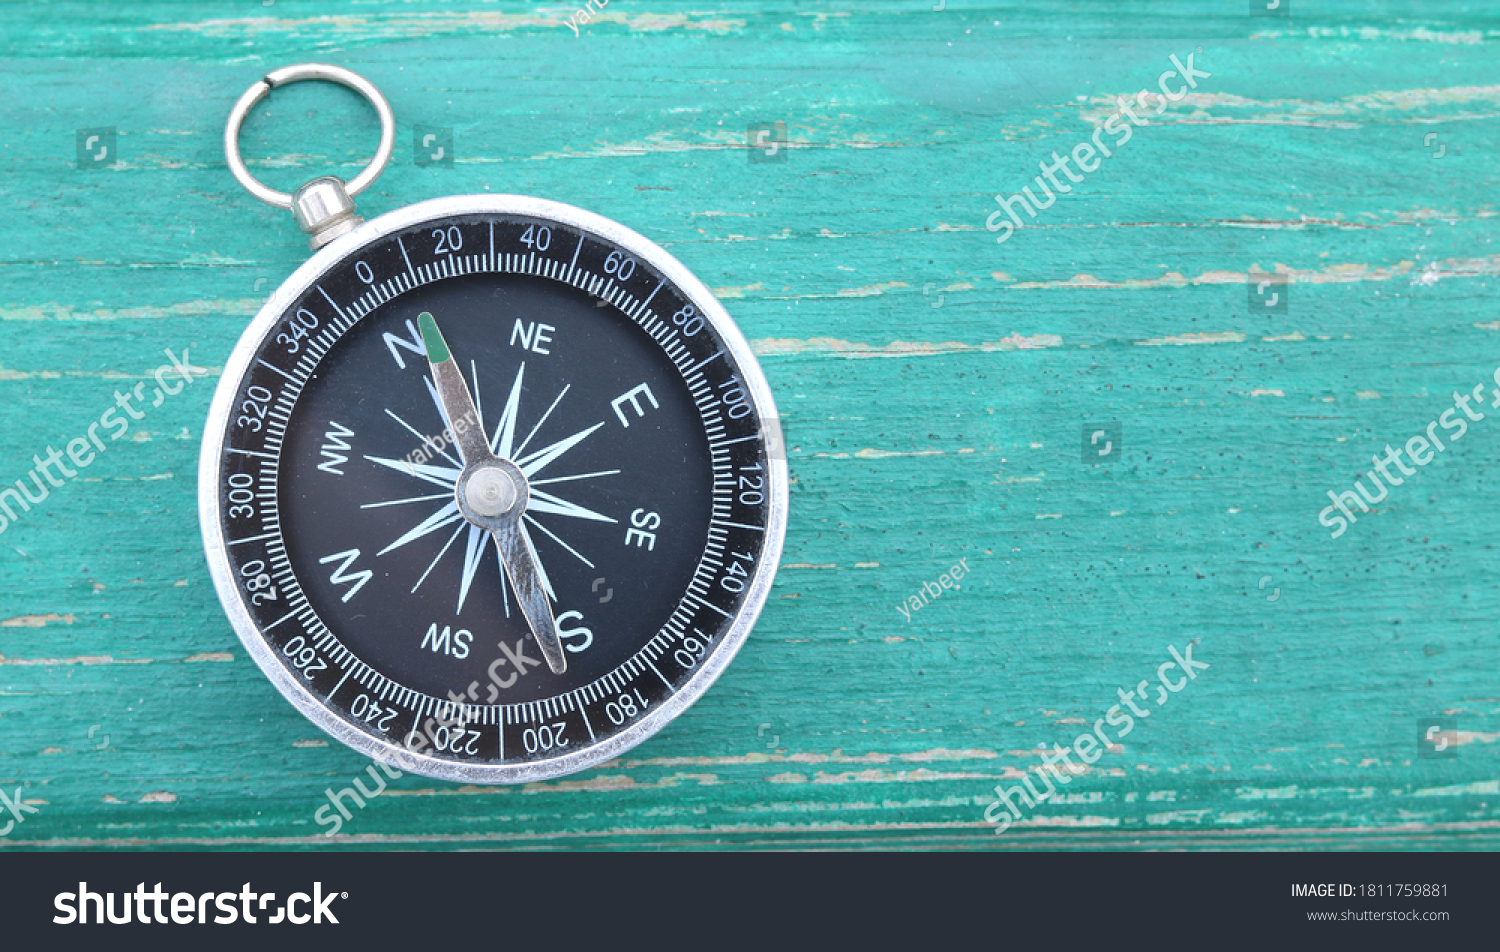 Classic round compass on green wooden vintage background as symbol of tourism with compass, travel with compass and outdoor activities with compass #1811759881